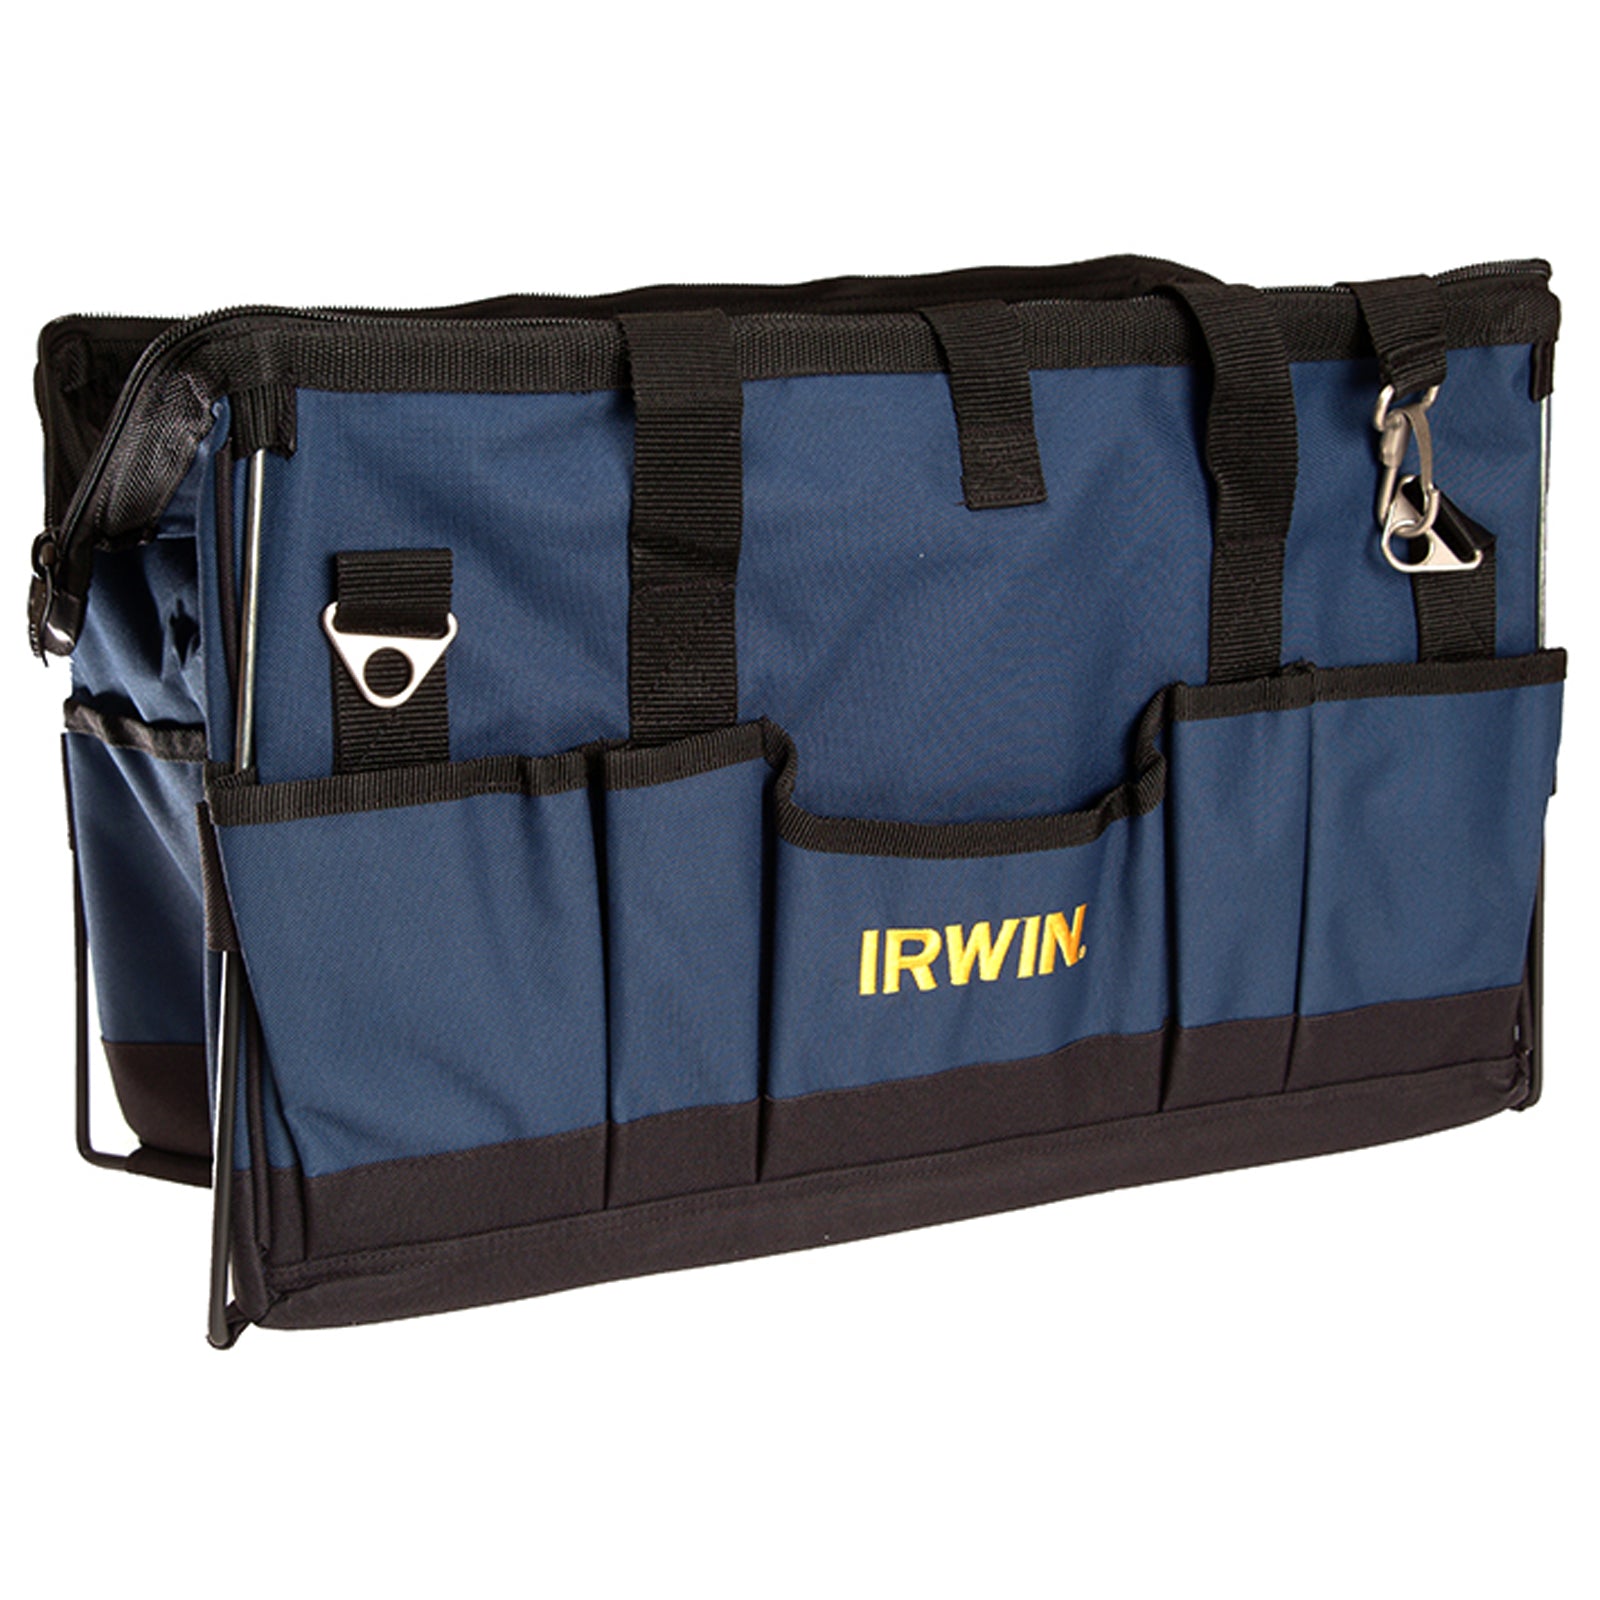 Irwin 600mm Soft Side Tool Bag Organiser with Pockets